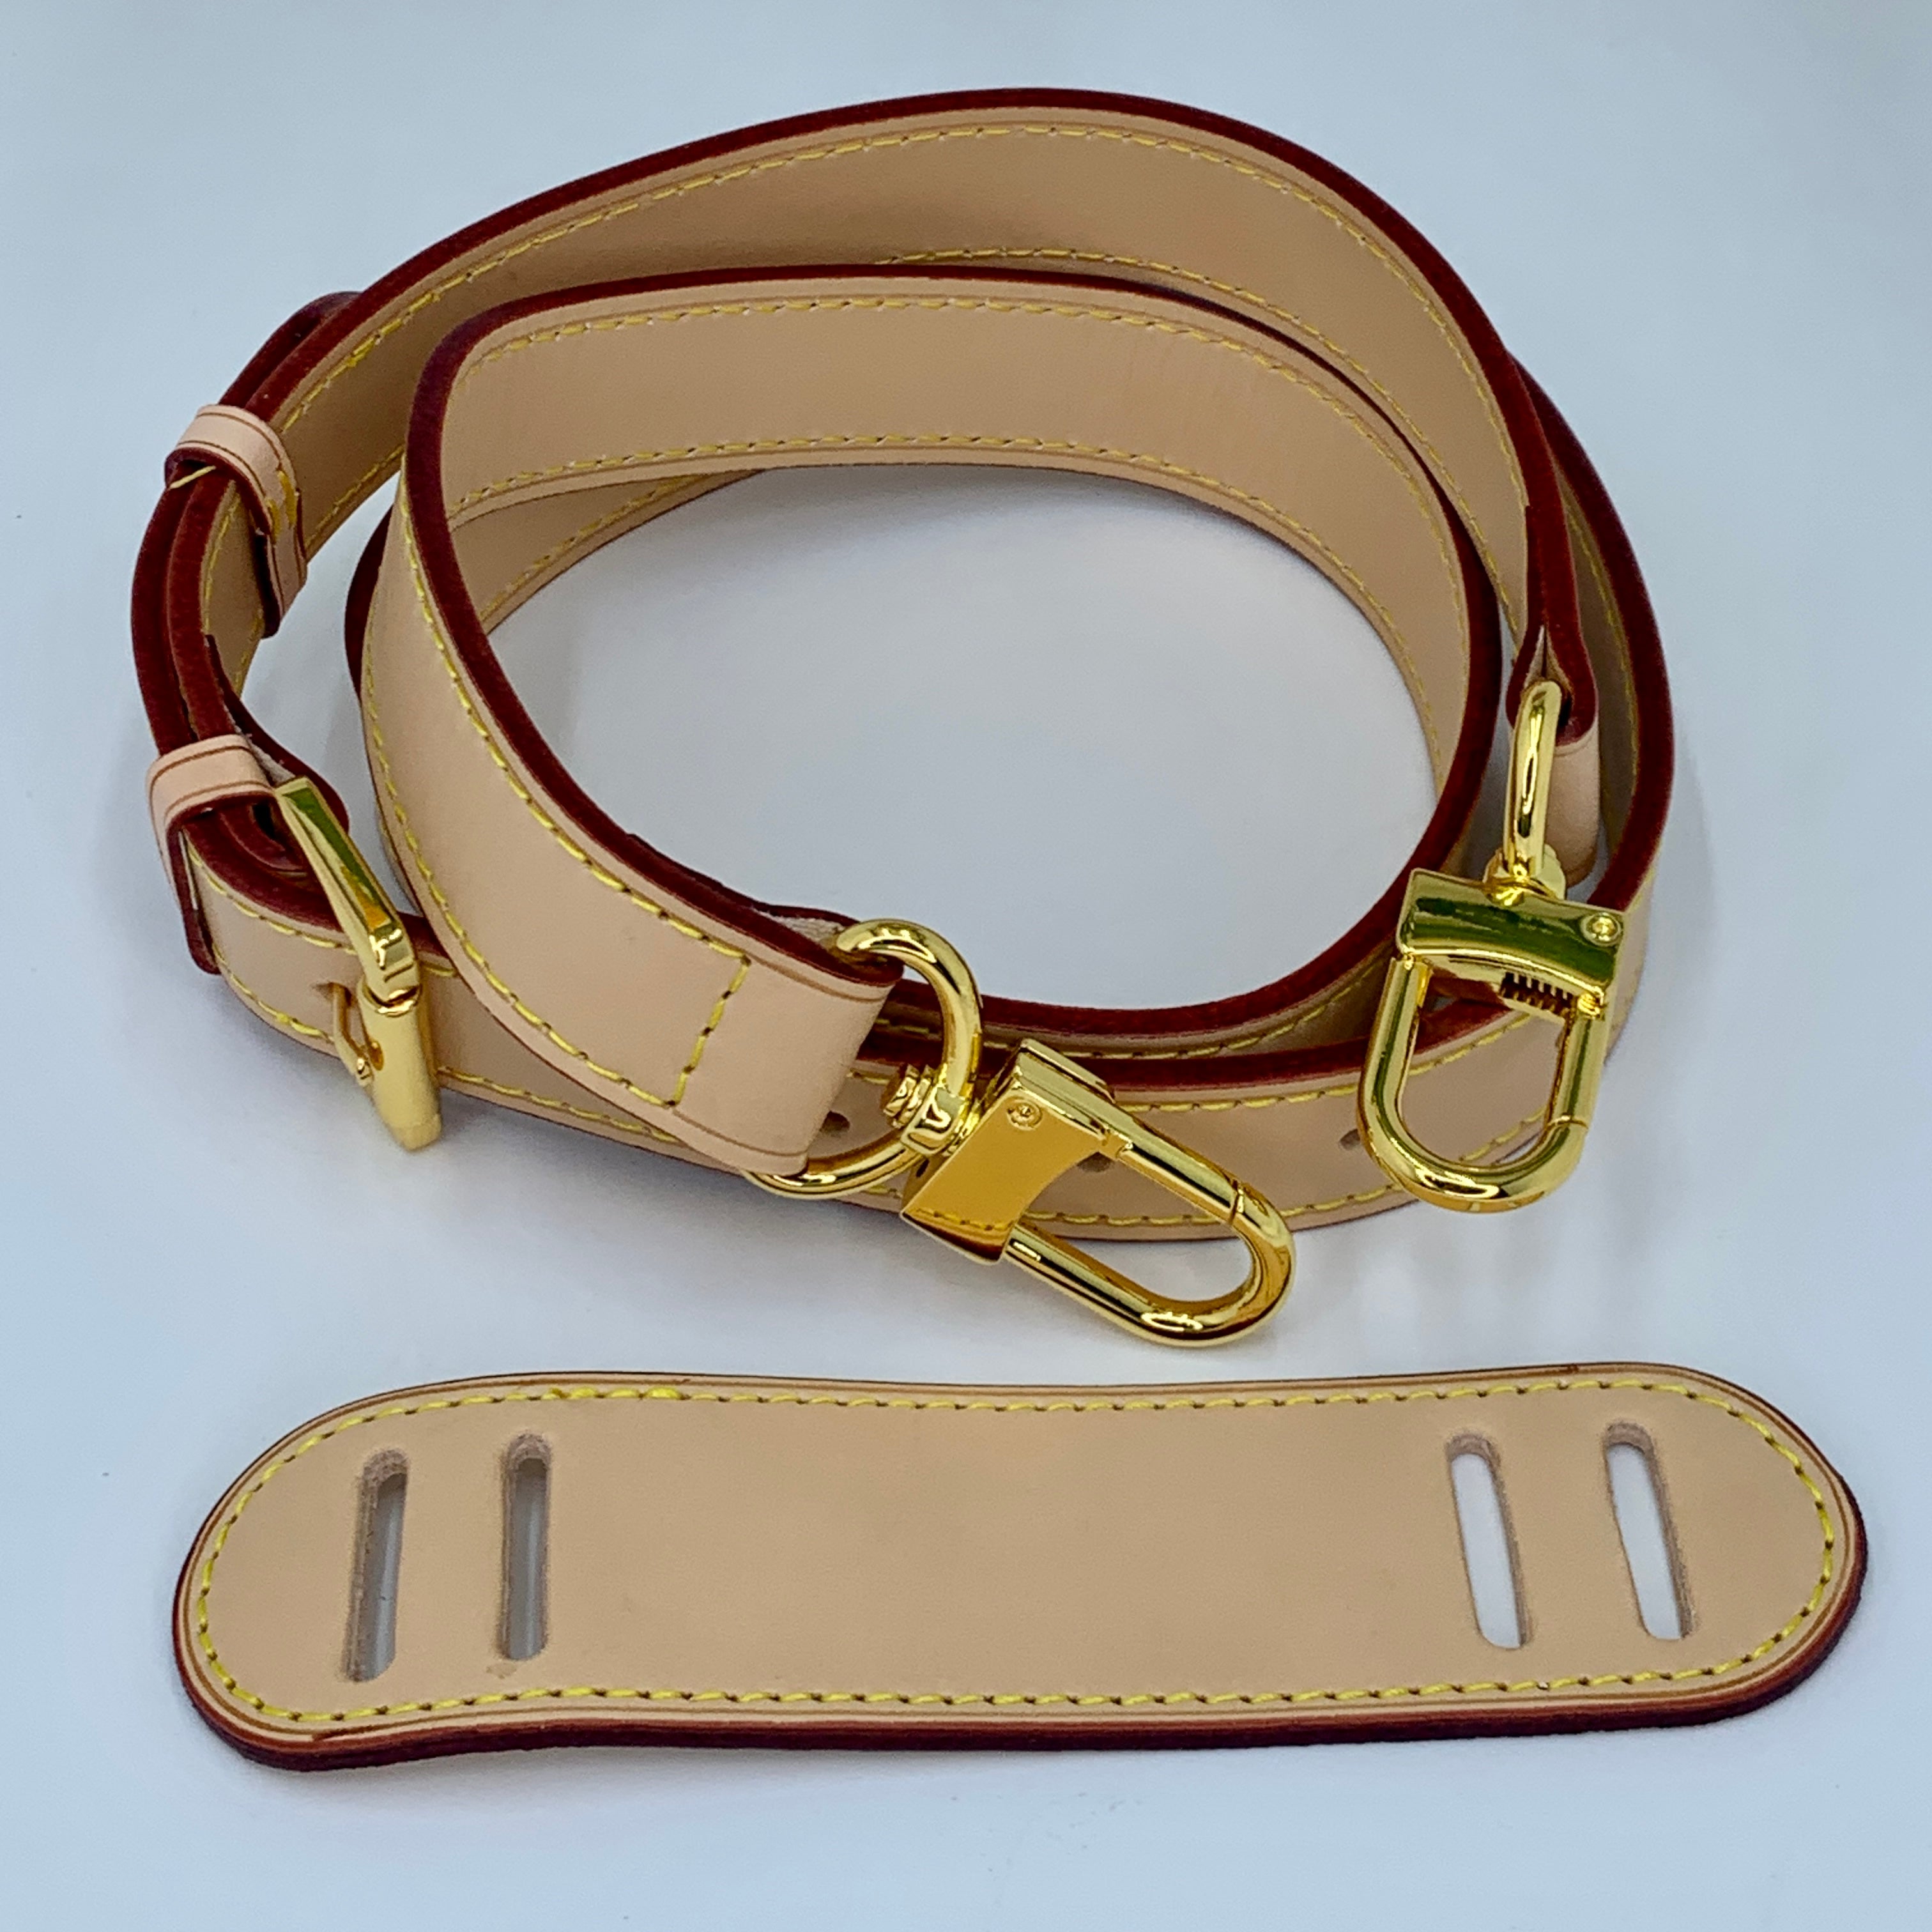 Adjustable Replacement strap for Speedy Bandouliere 1 inches